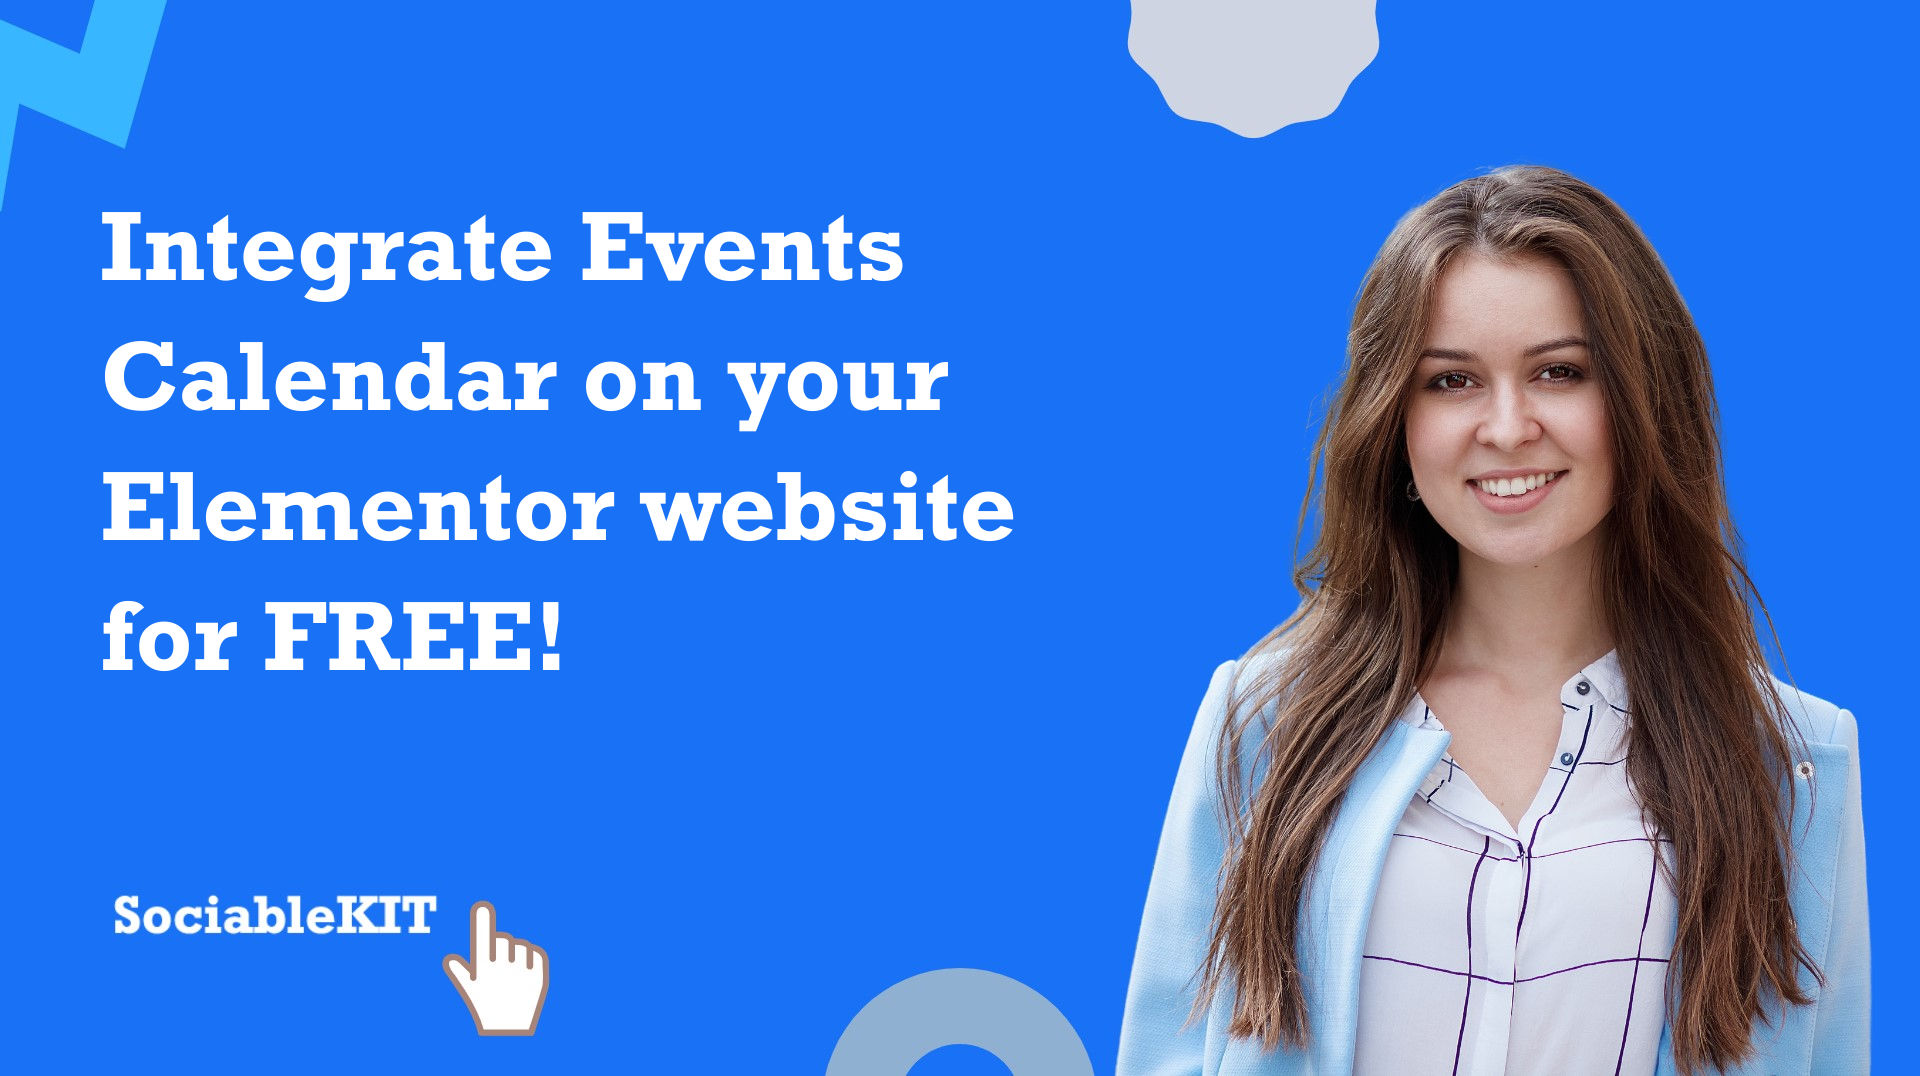 Integrate Events Calendar on your Elementor website for FREE?